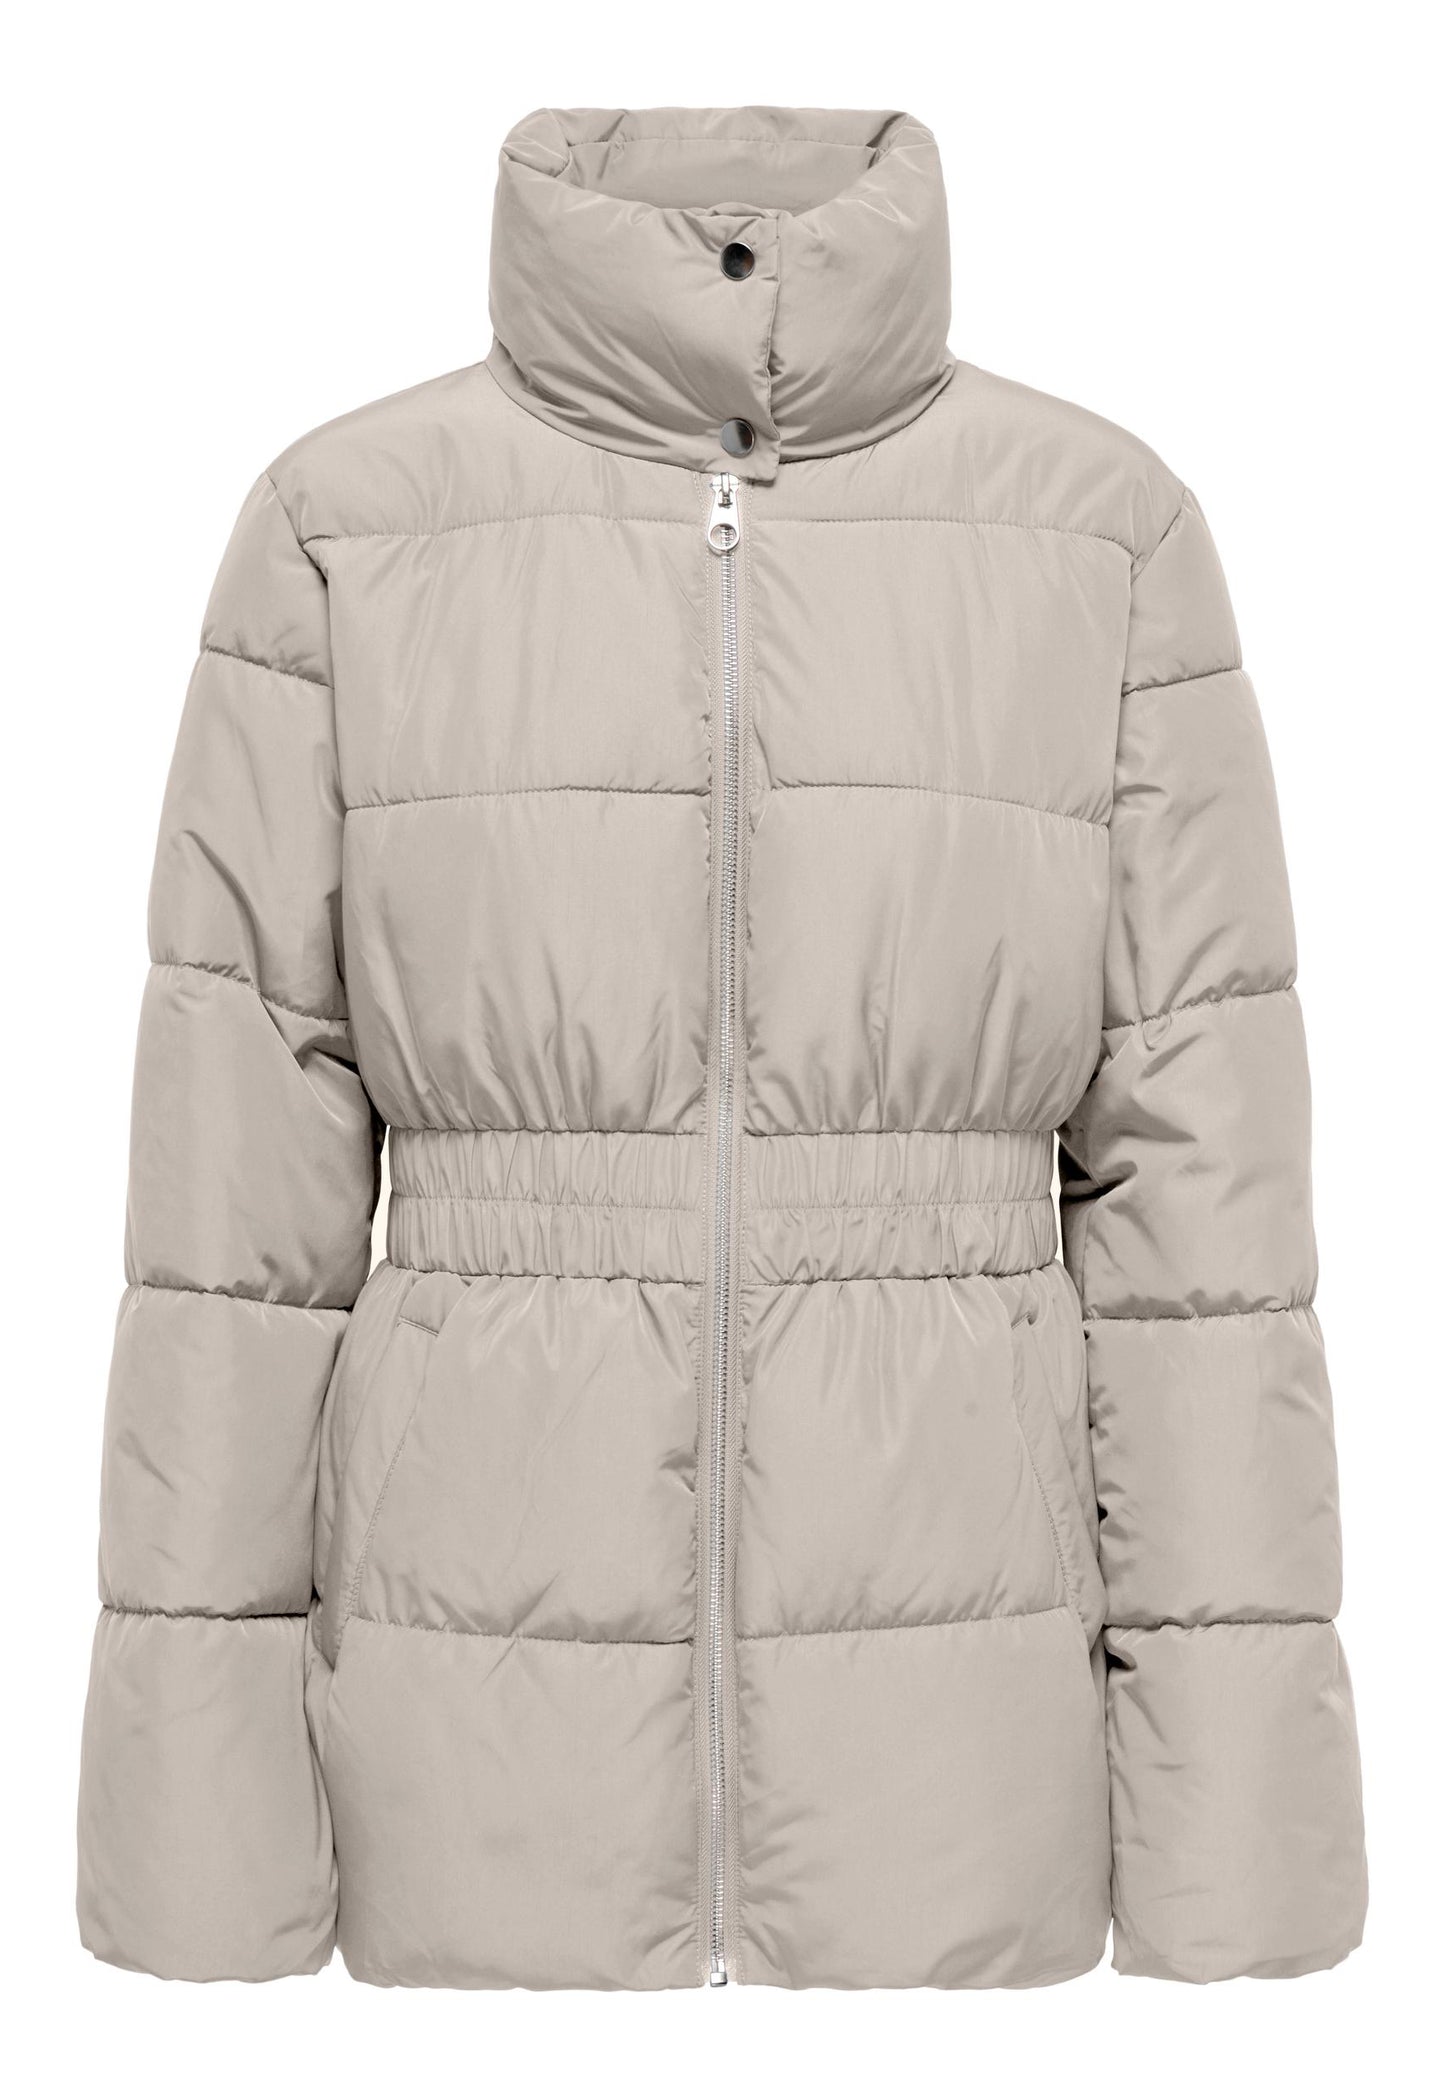 JDY Imagine Longline Hooded Puffer Jacket with Elasticated Waist in Cream - One Nation Clothing